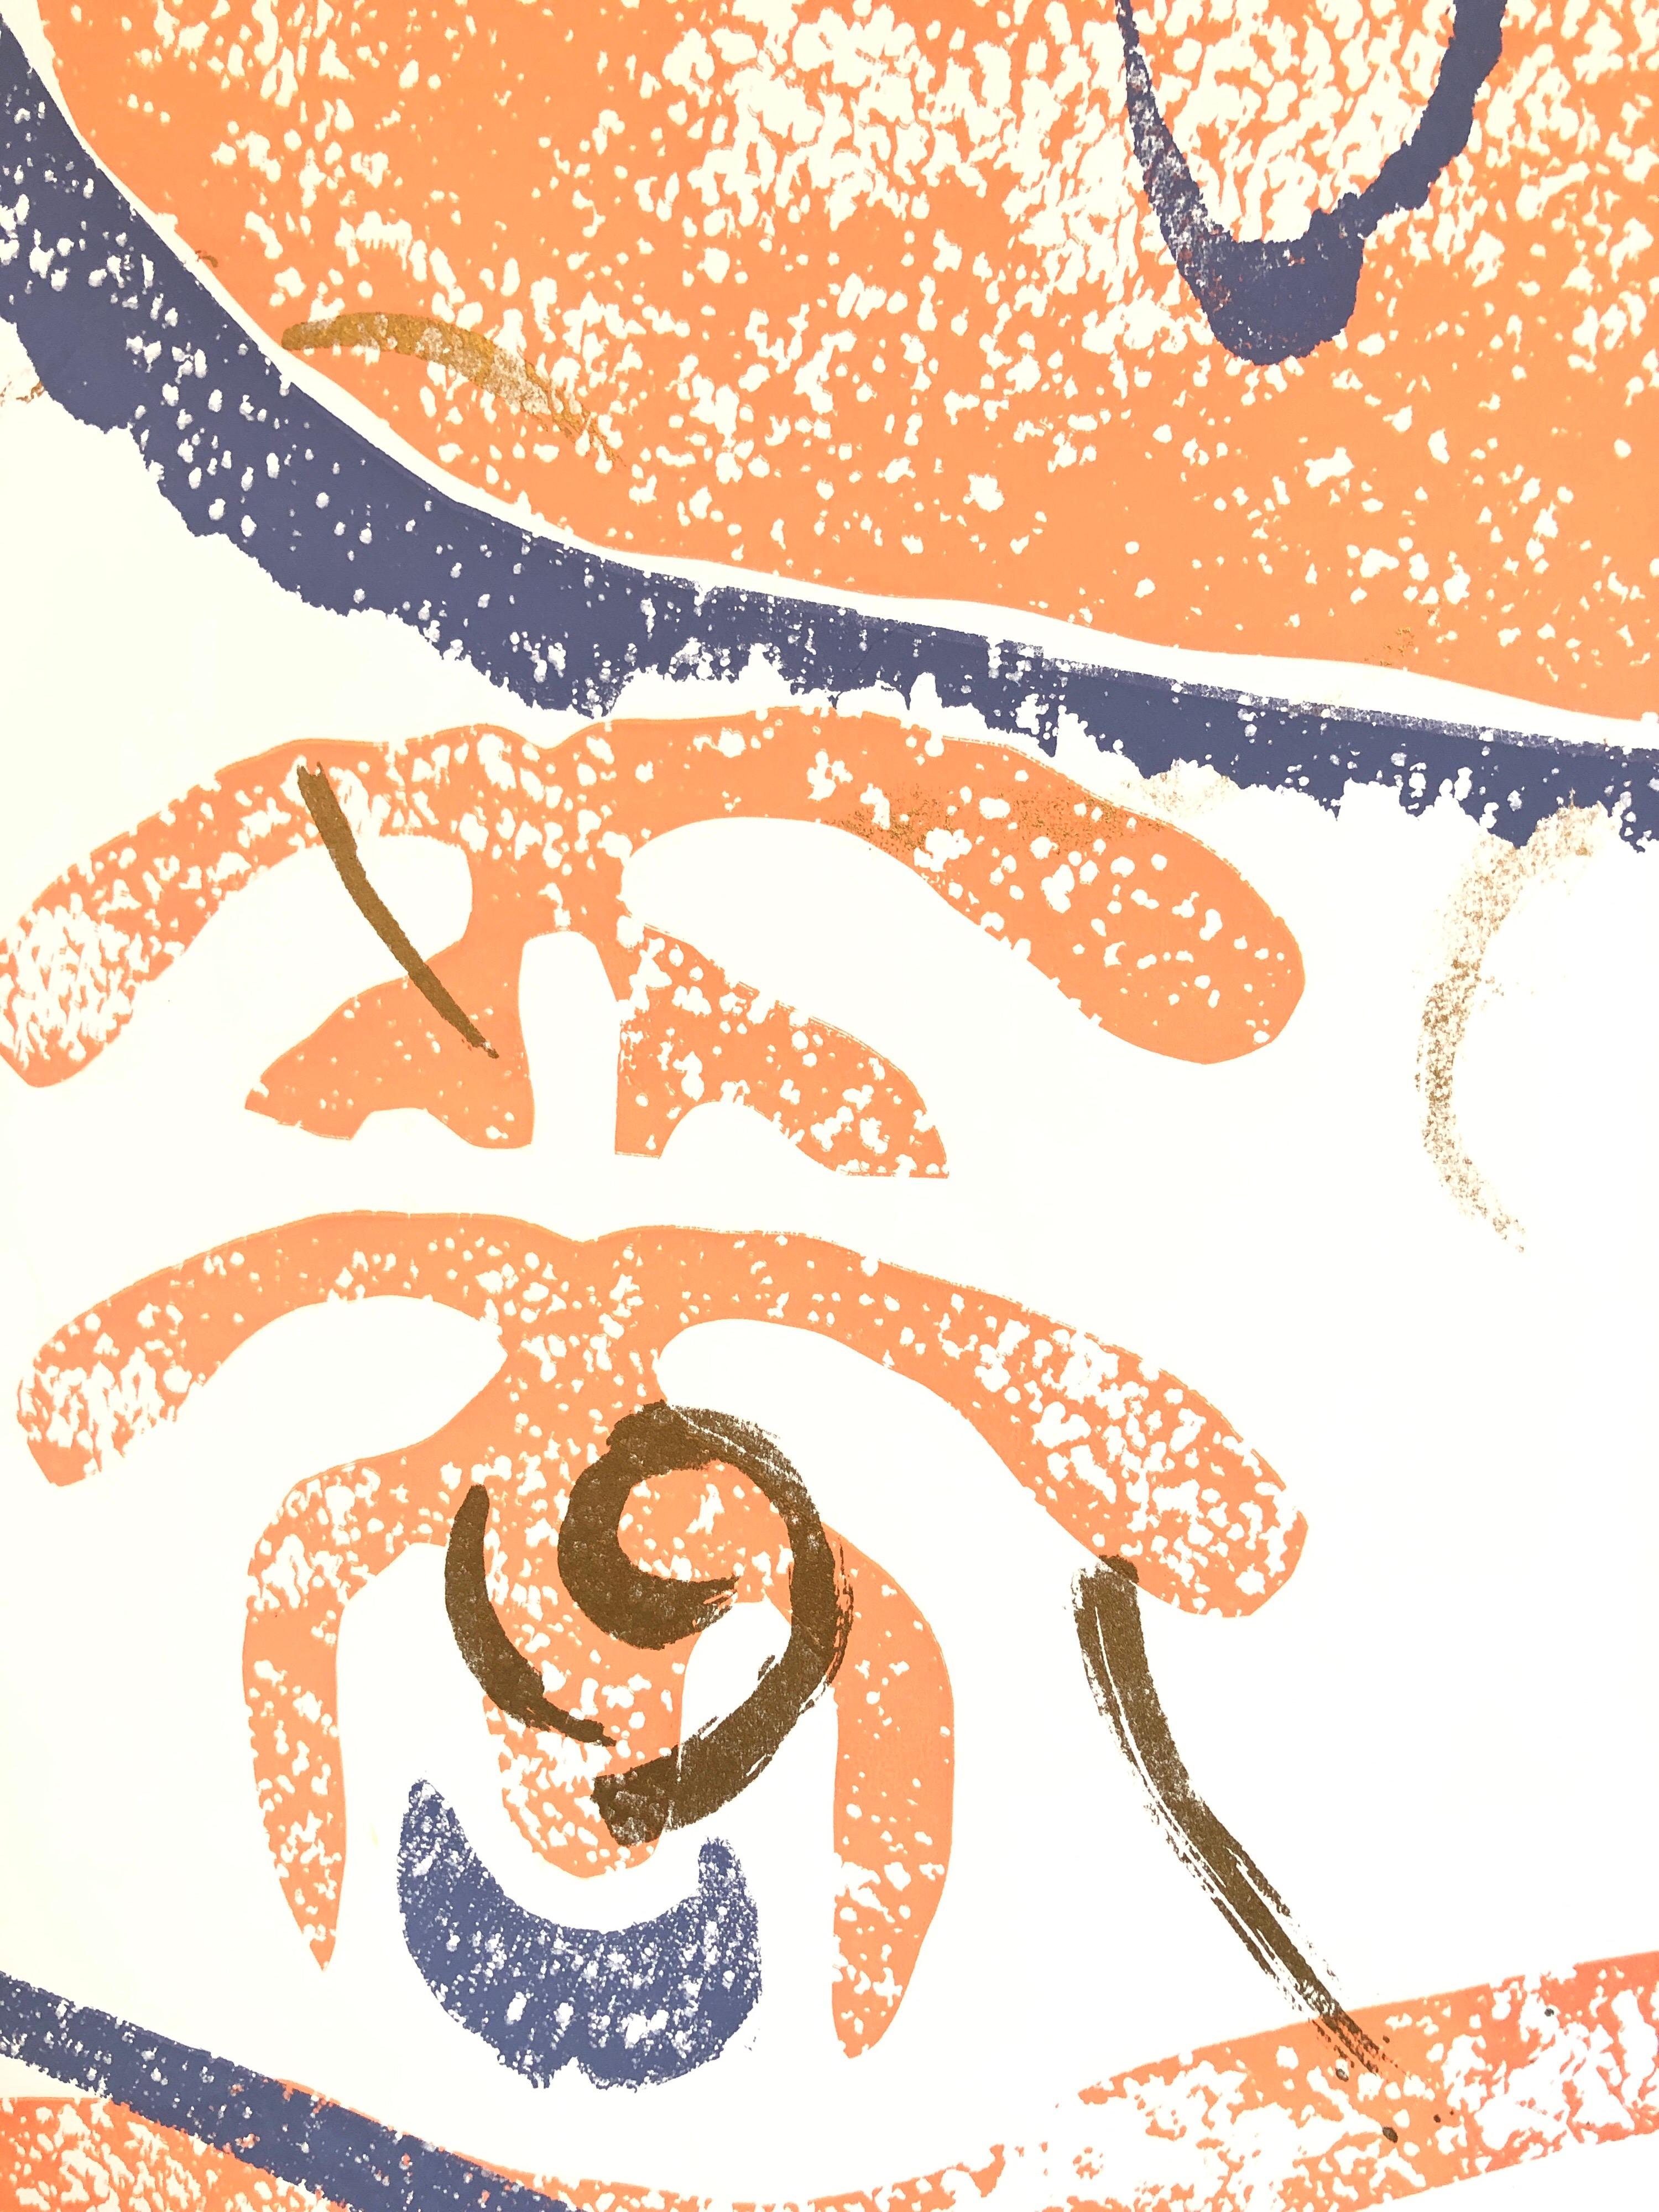 Motif (Abstract) in orange, blue and gold abstract.
From the small edition of 10. from 1982. I am not sure if this is a woodcut or woodblock print or a silkscreen screenprint or some combination. 

Viola Burley Leak, American (1944 - )
Viola Leak